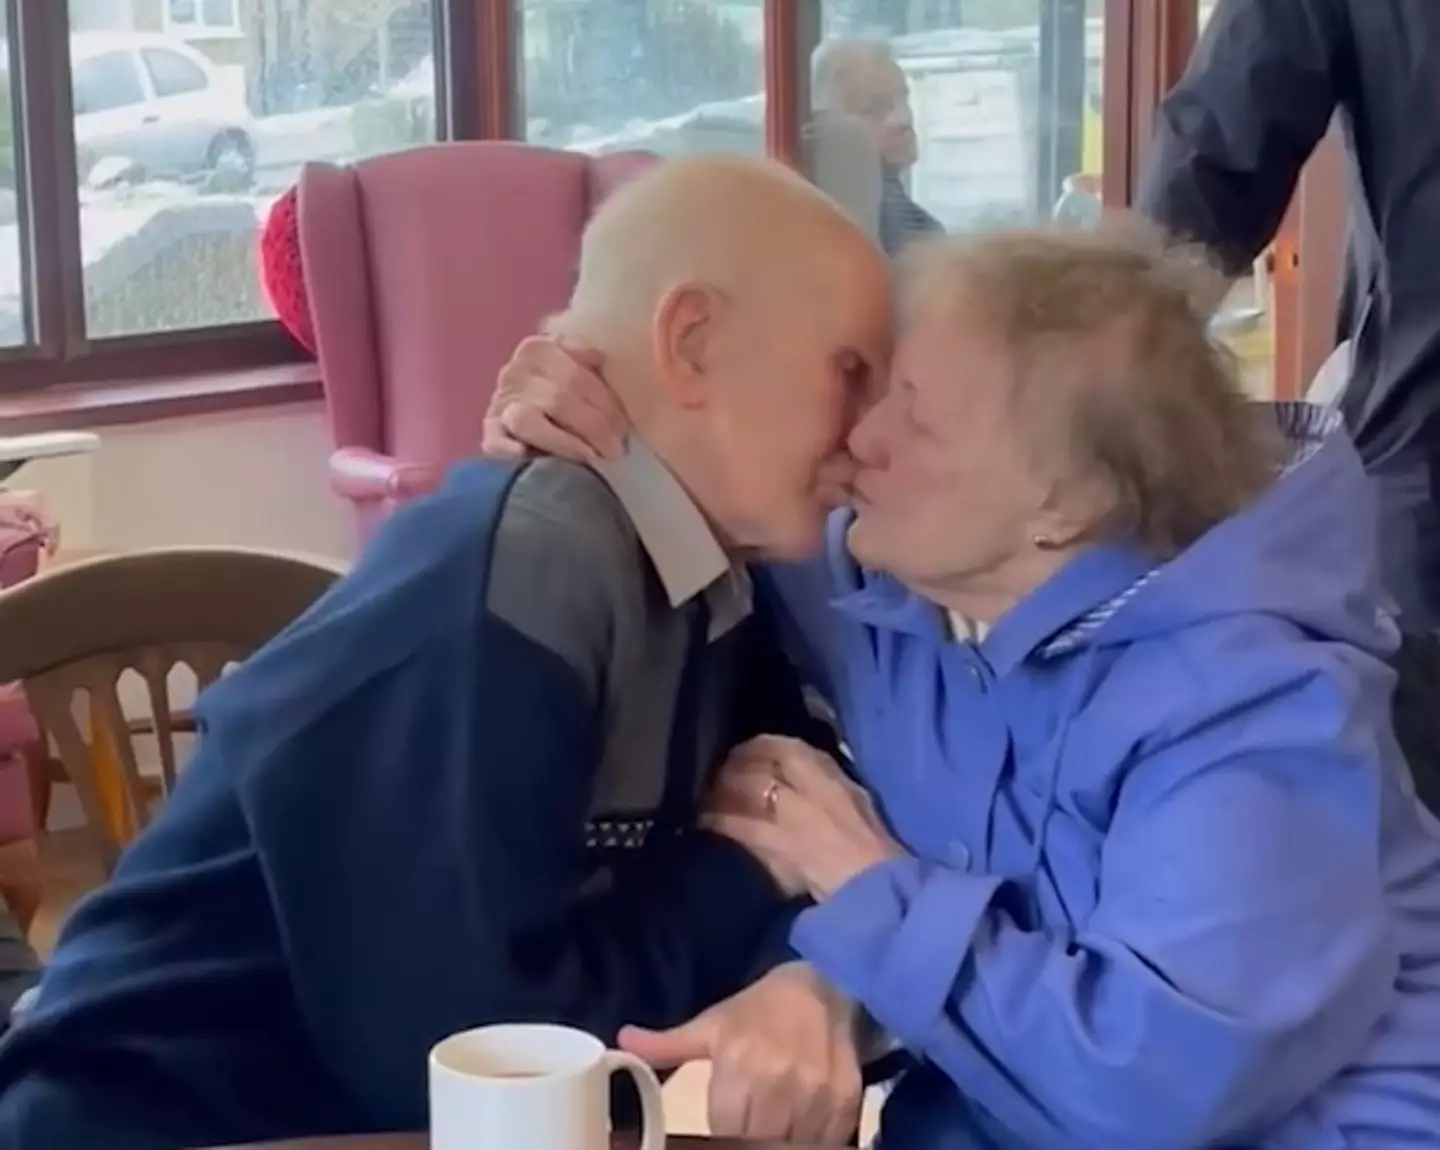 They've been married for 69 years.